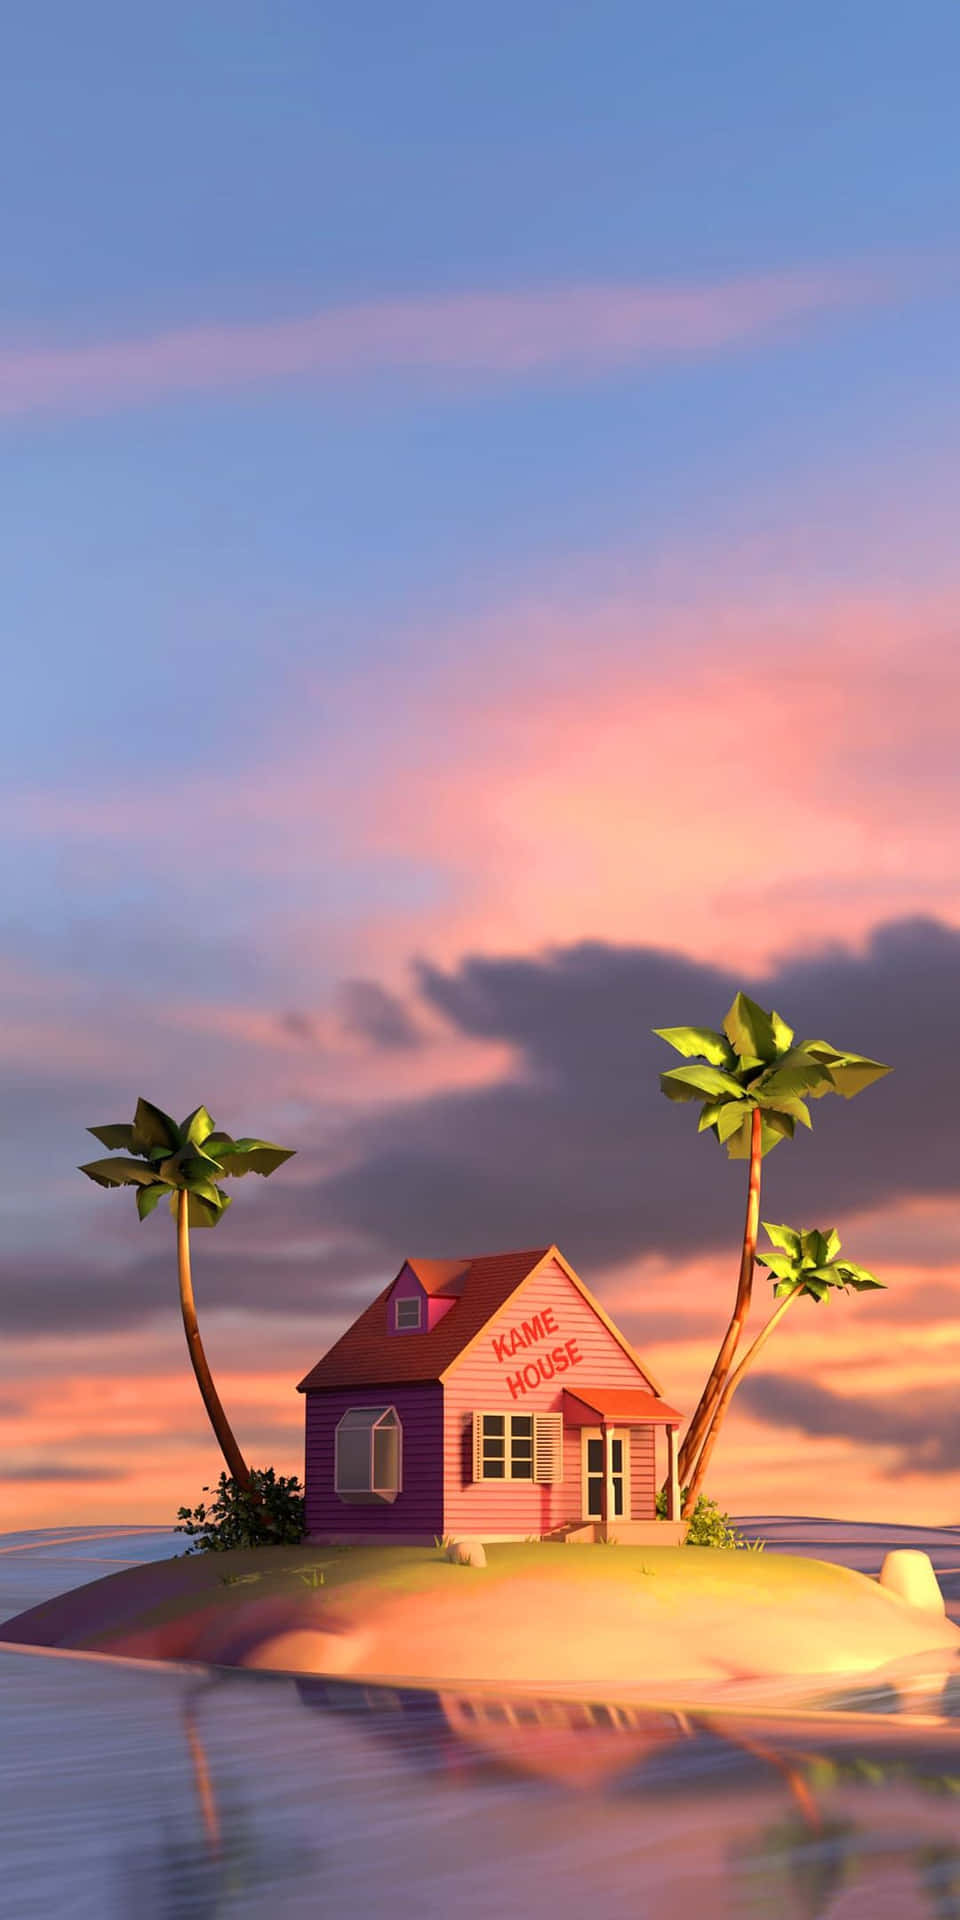 An iconic shot of Kame House, a popular travel destination. Wallpaper